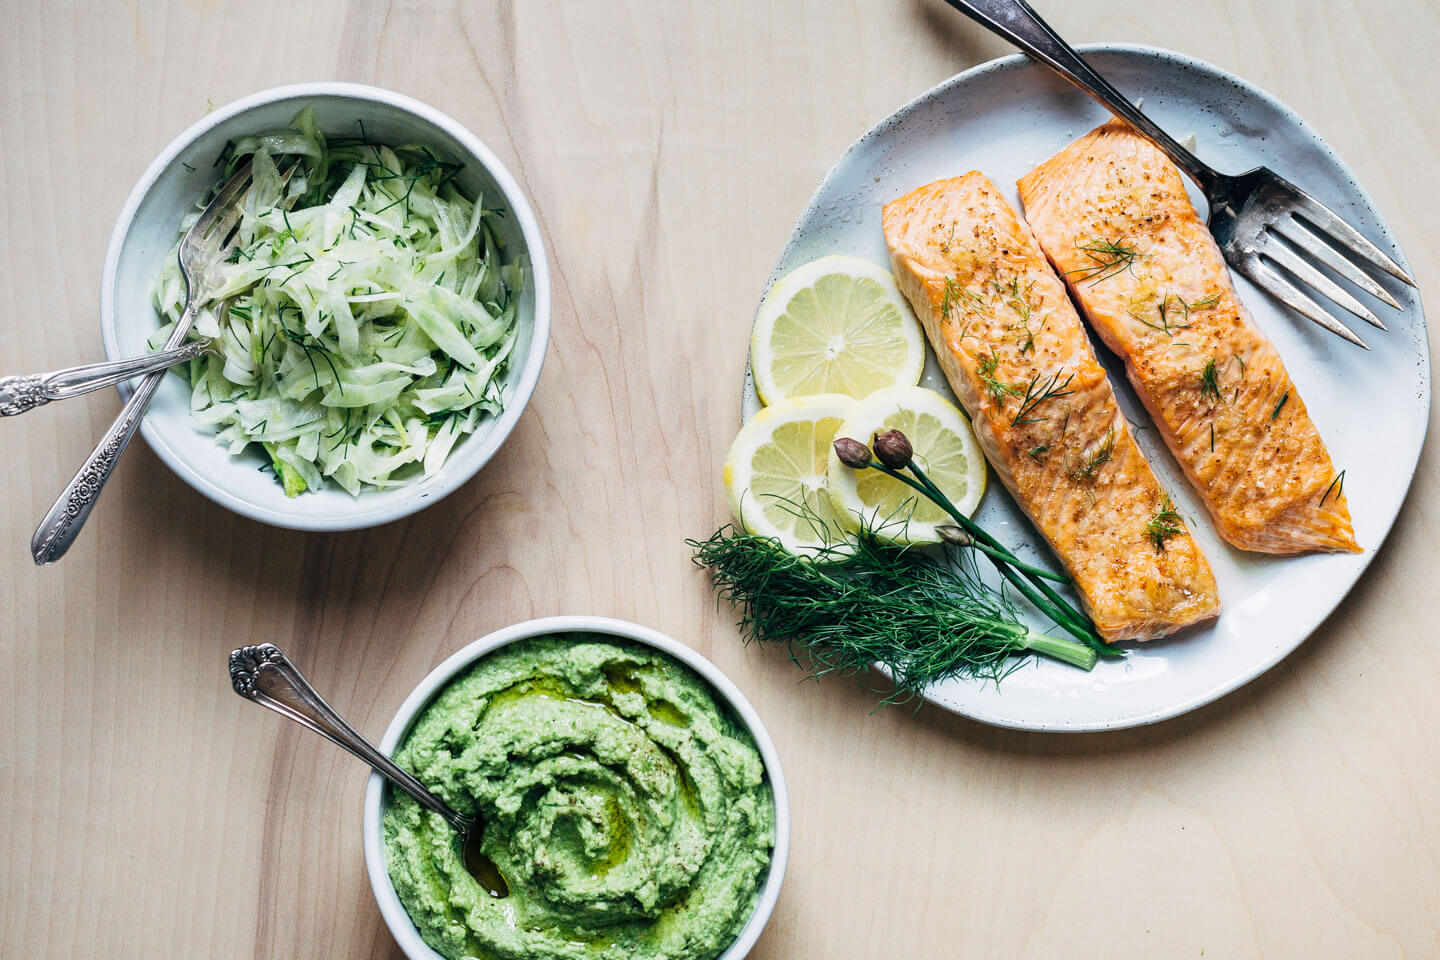 A creamy, mild asparagus pesto that tastes like spring! Made with garden chives, soaked sunflower seeds, and Parmesan, it's perfect served alongside broiled salmon and lemony fennel slaw. 